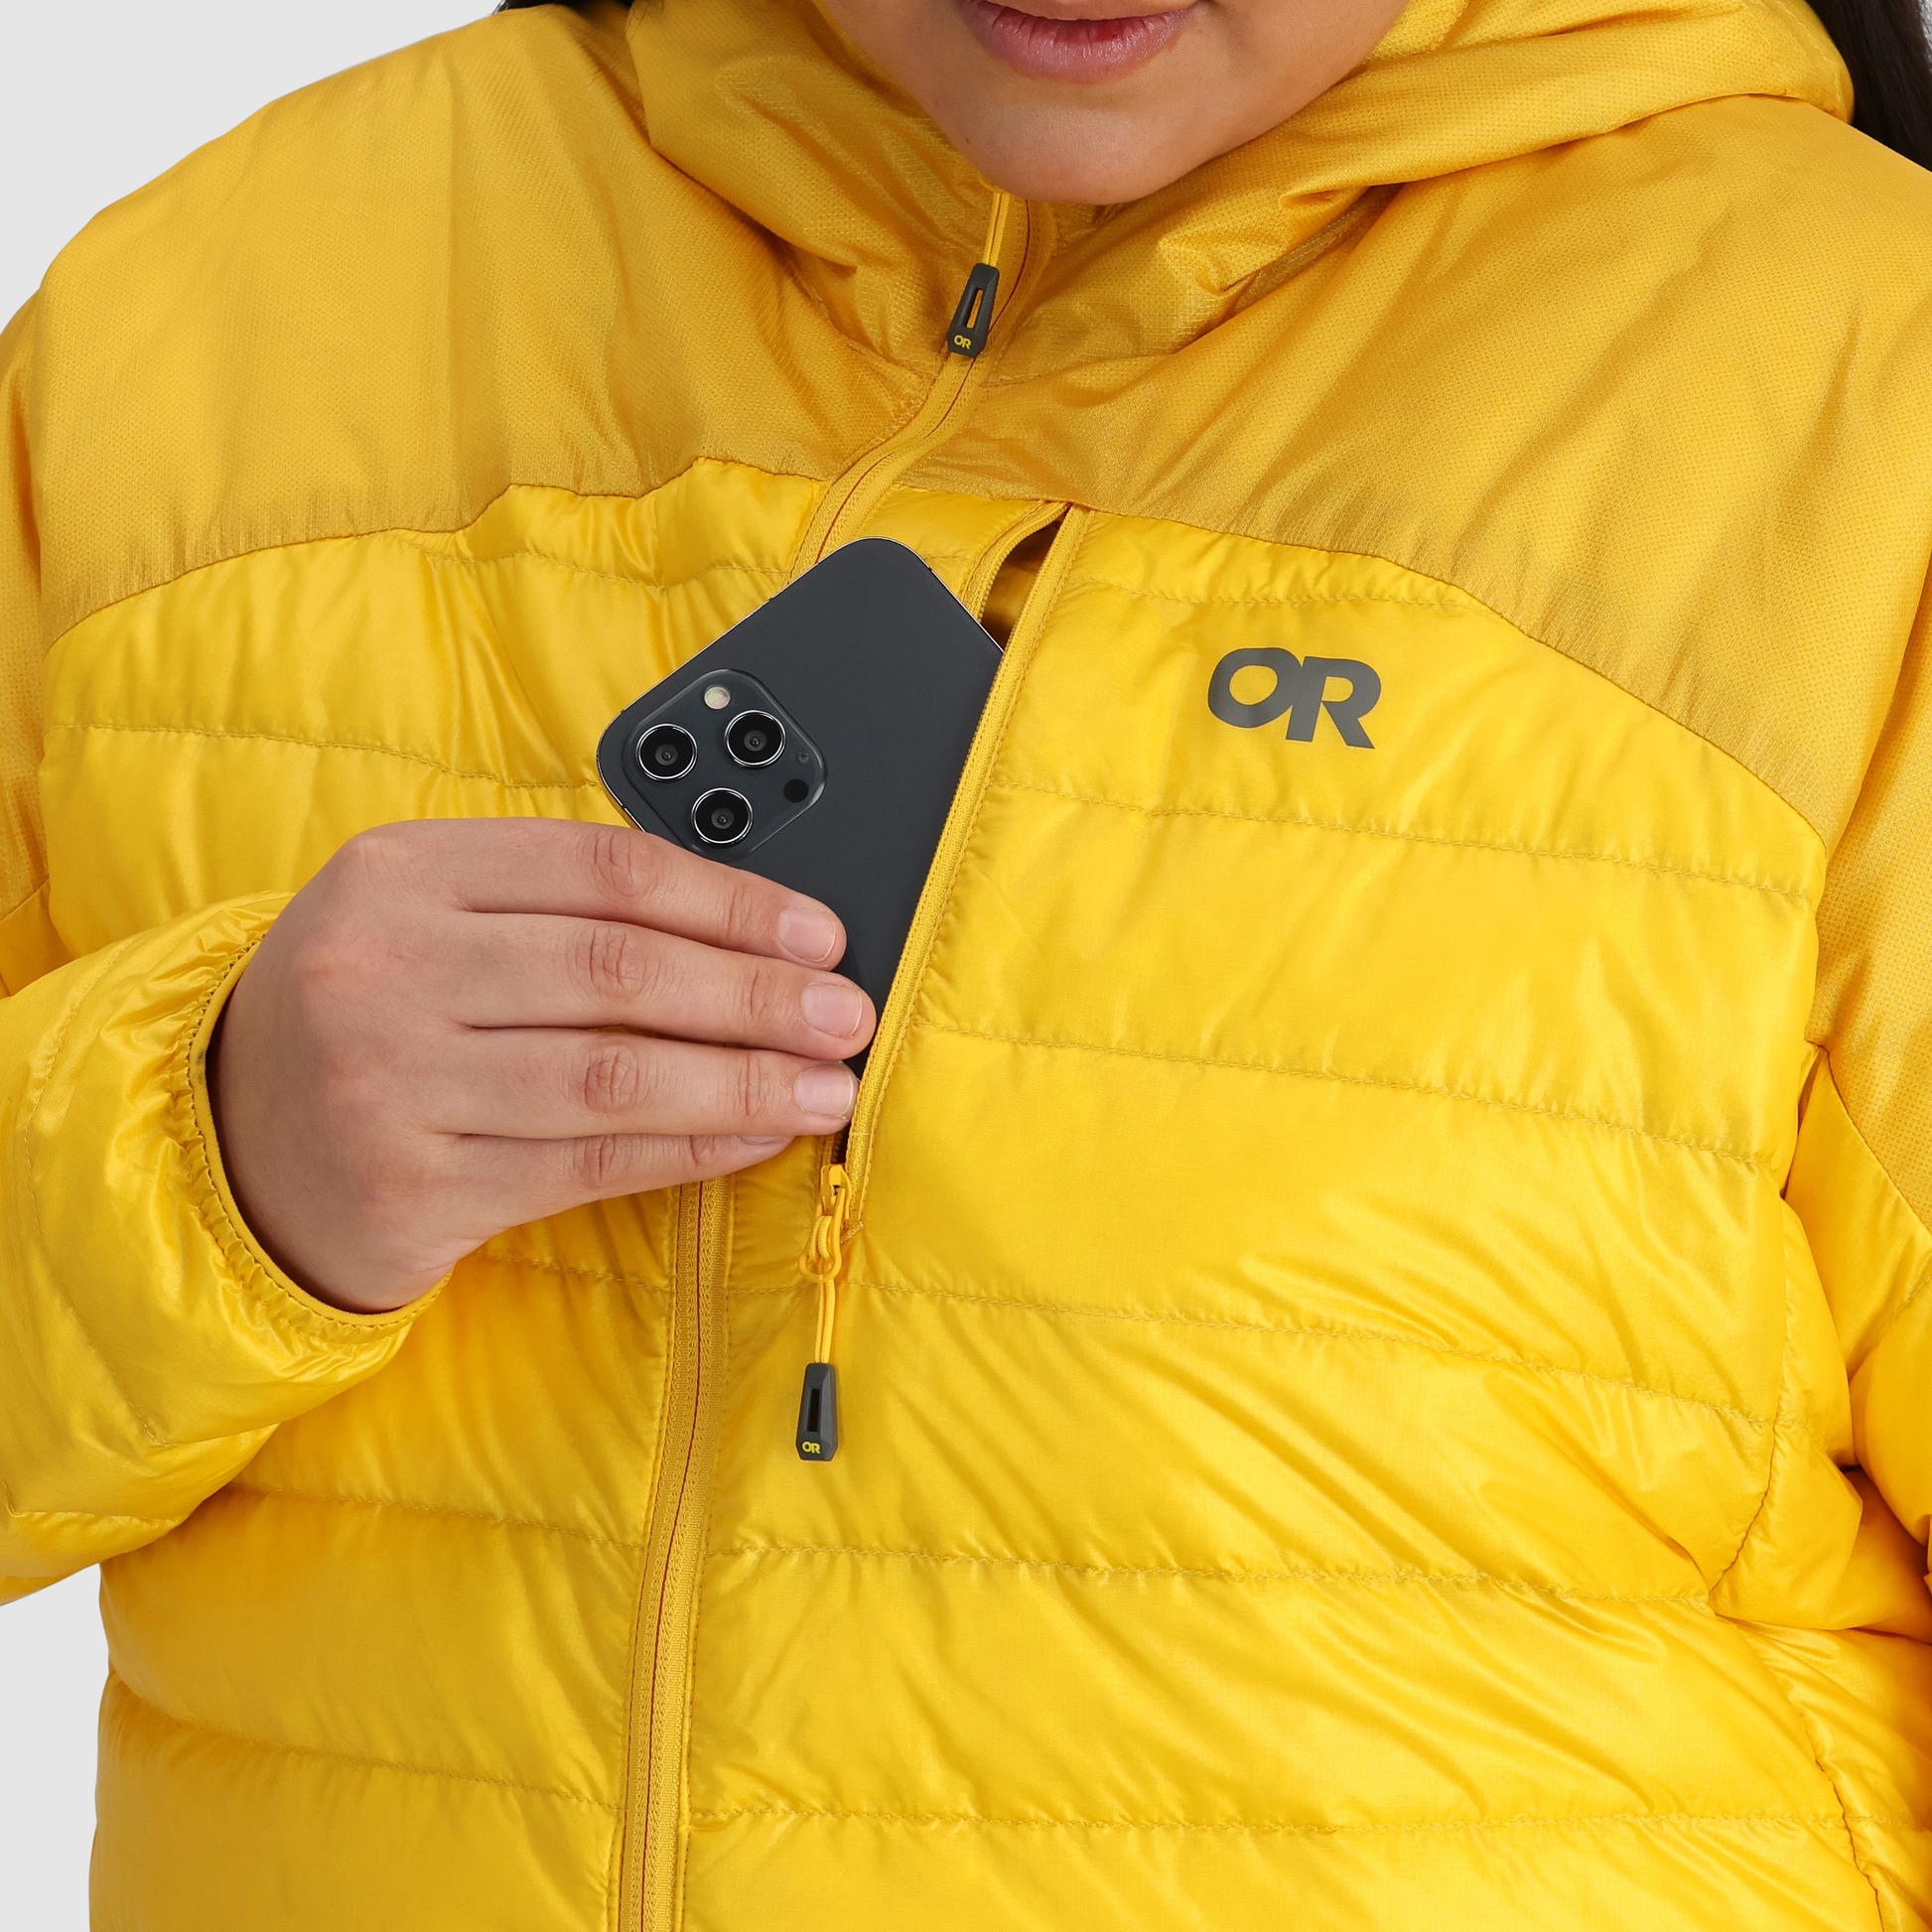 B2 :: Exterior Chest Pocket / Quickly access your phone, snacks, and other stored valuables in this quick-zip pocket.